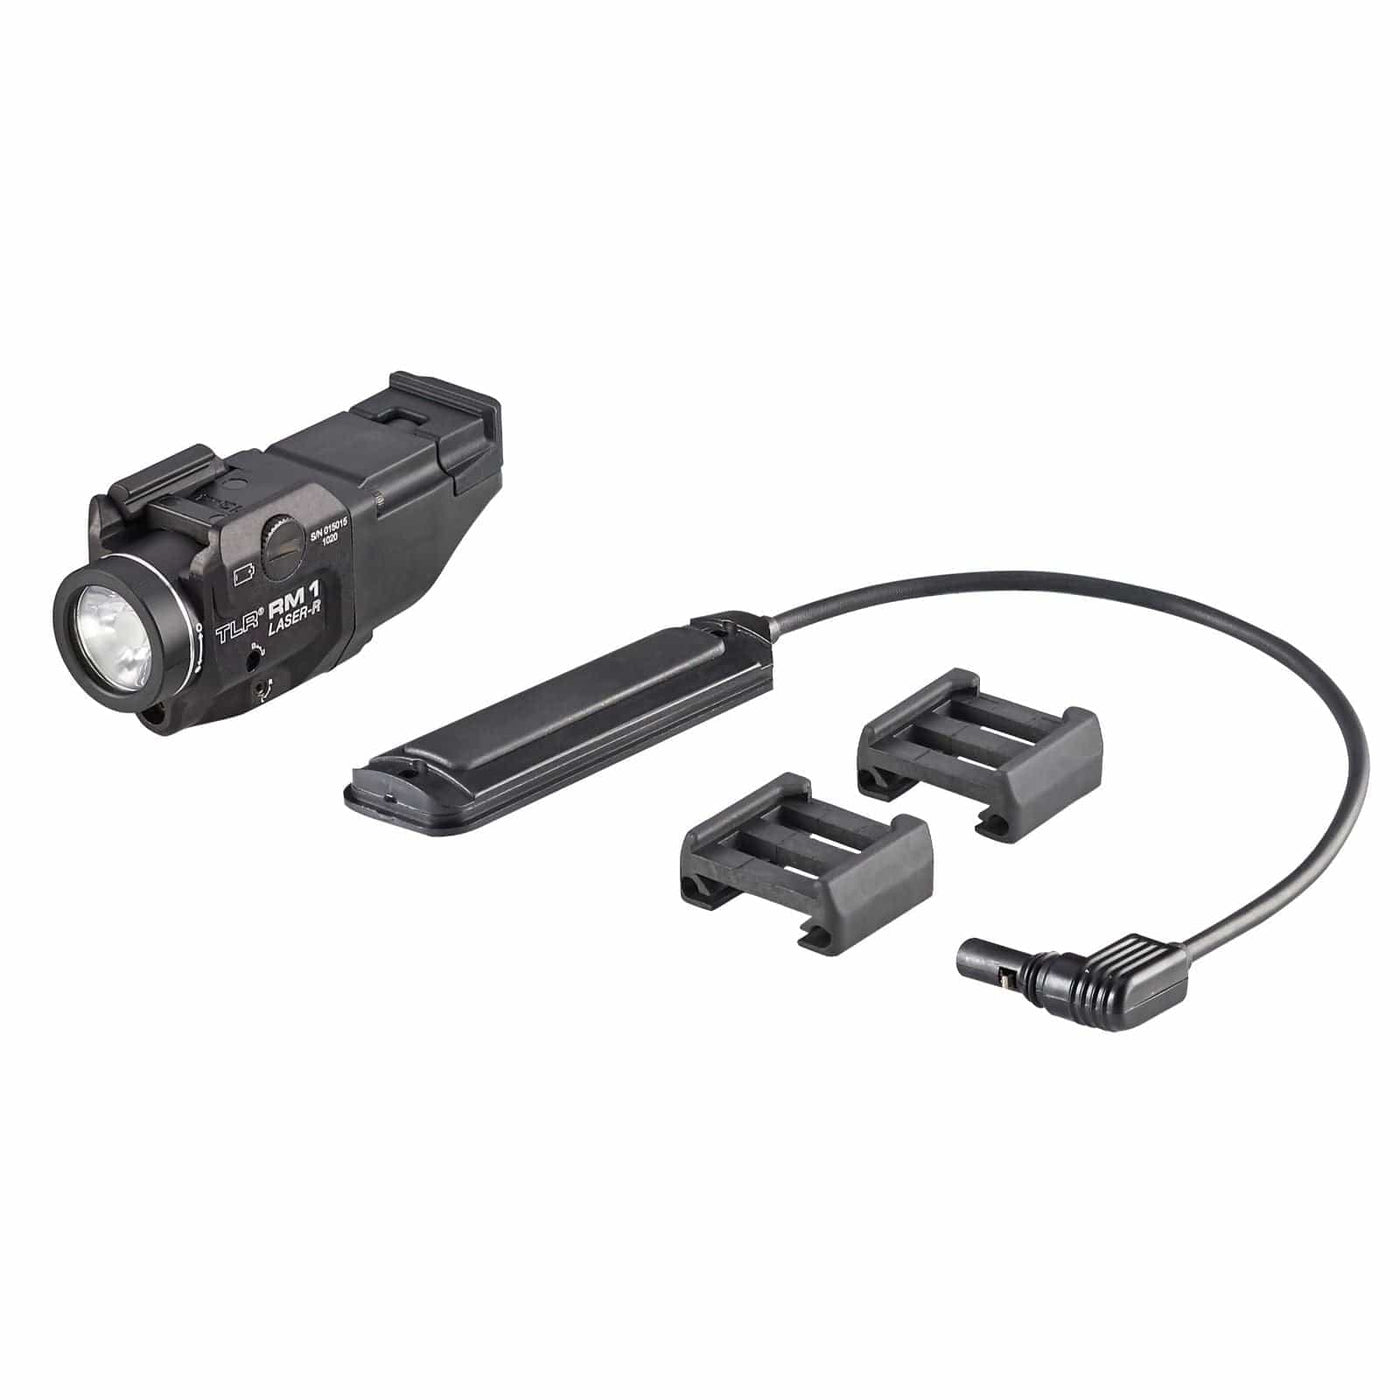 Streamlight Streamlight Tlr Rm 1 Long Gun Weapon Light Black 500 Lumens With Laser And Pressure Switch Optics And Sights